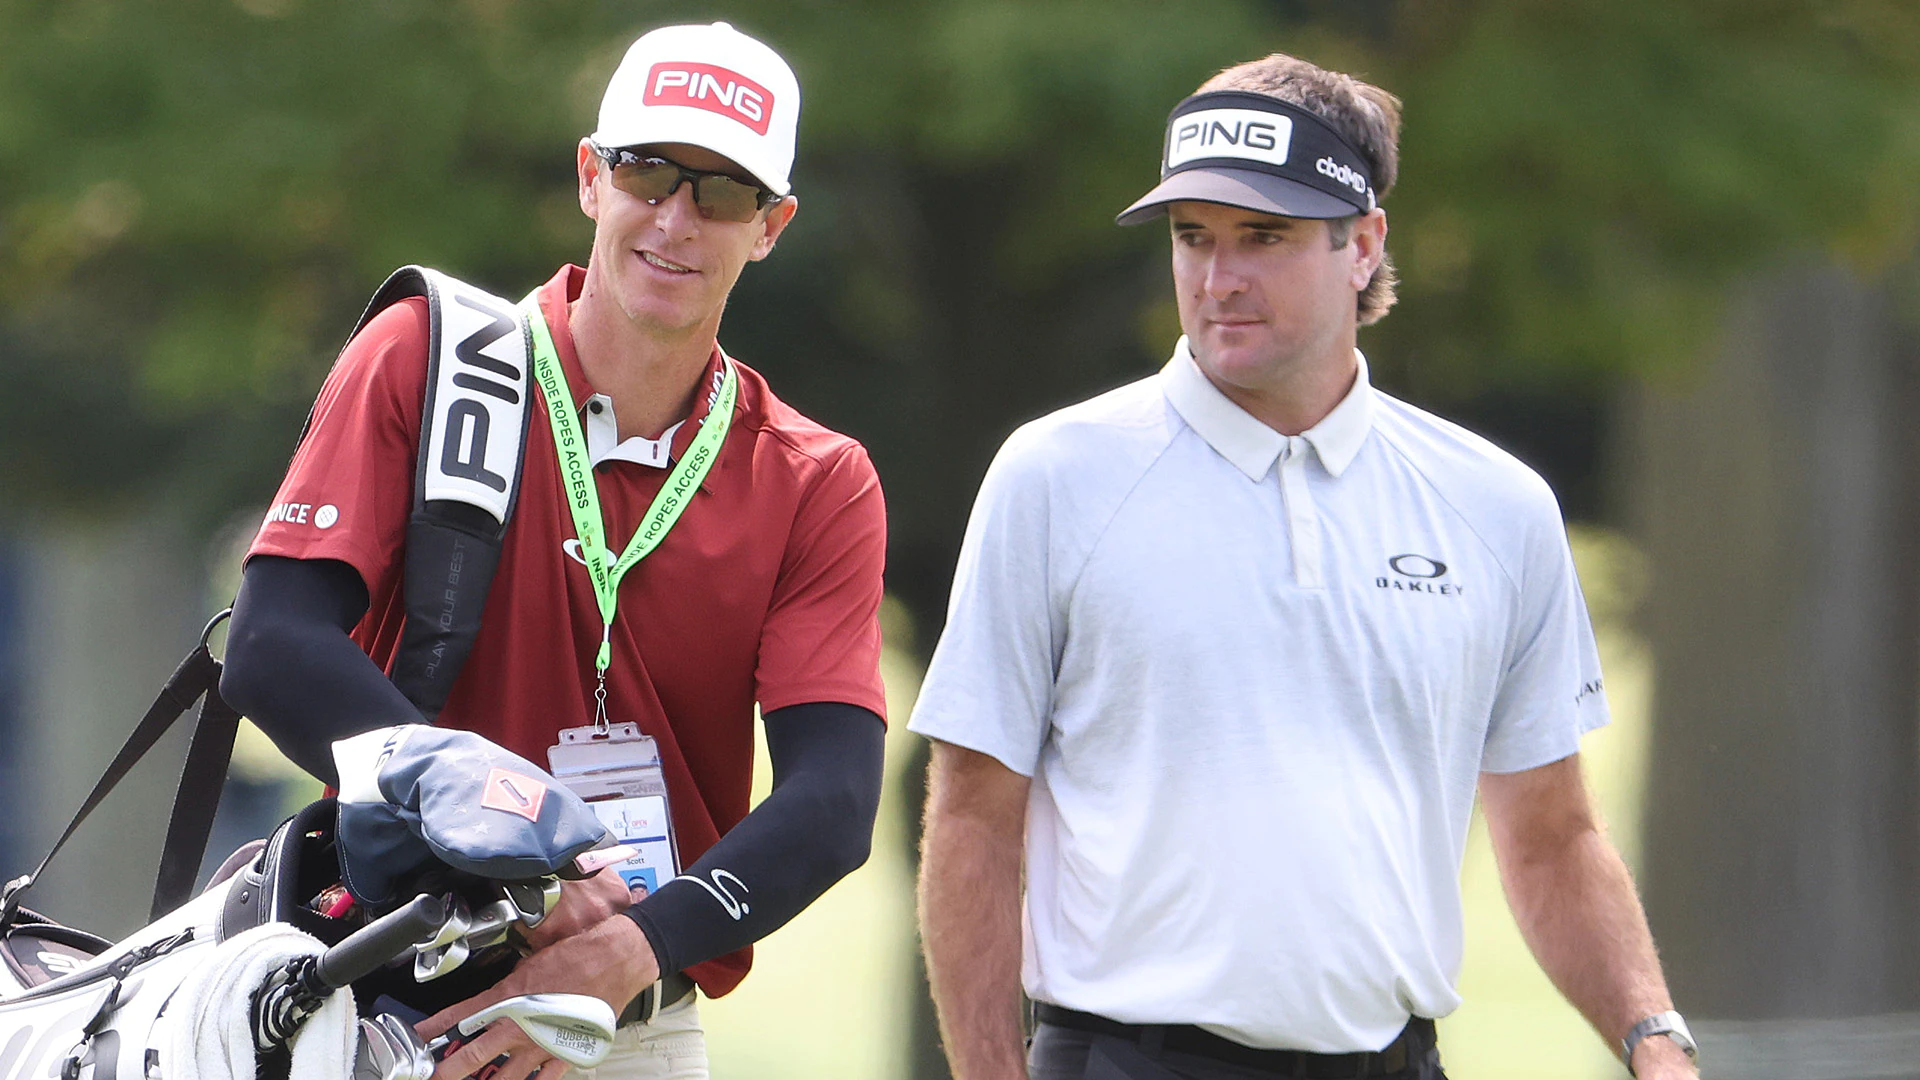 Bubba Watson happy for former-caddie Ted Scott, who he calls a ‘great friend’